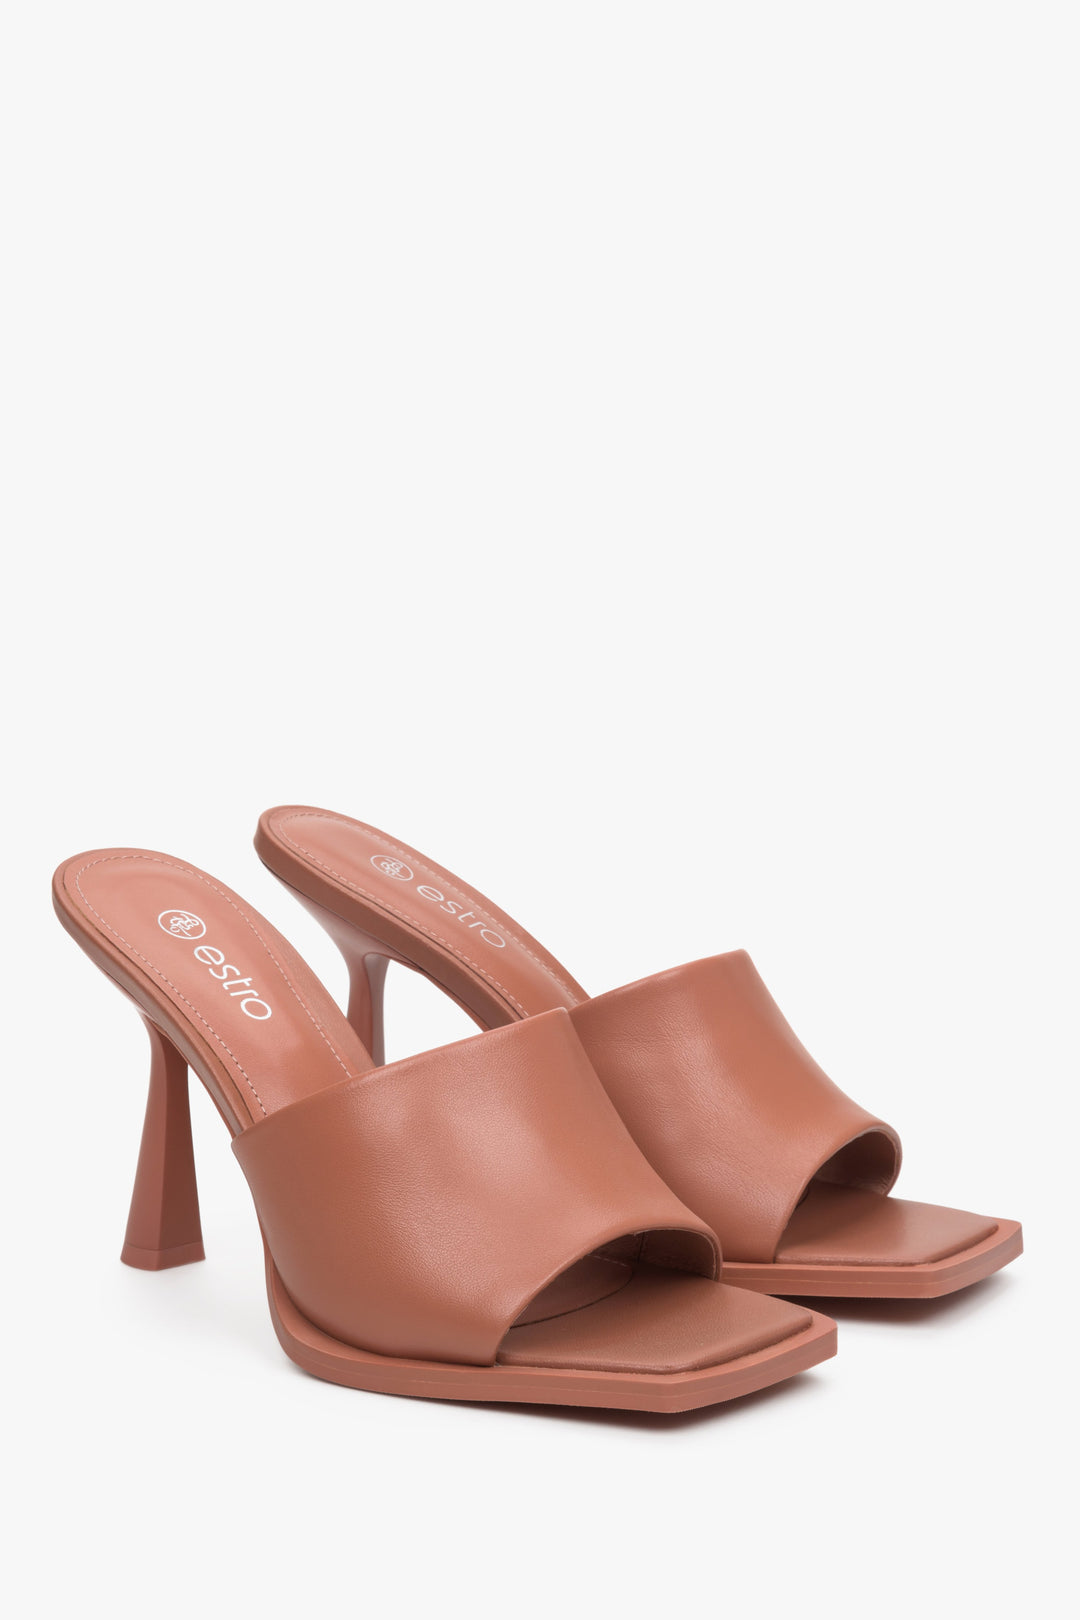 Women's brown stiletto mules made of natural leather, Estro brand.